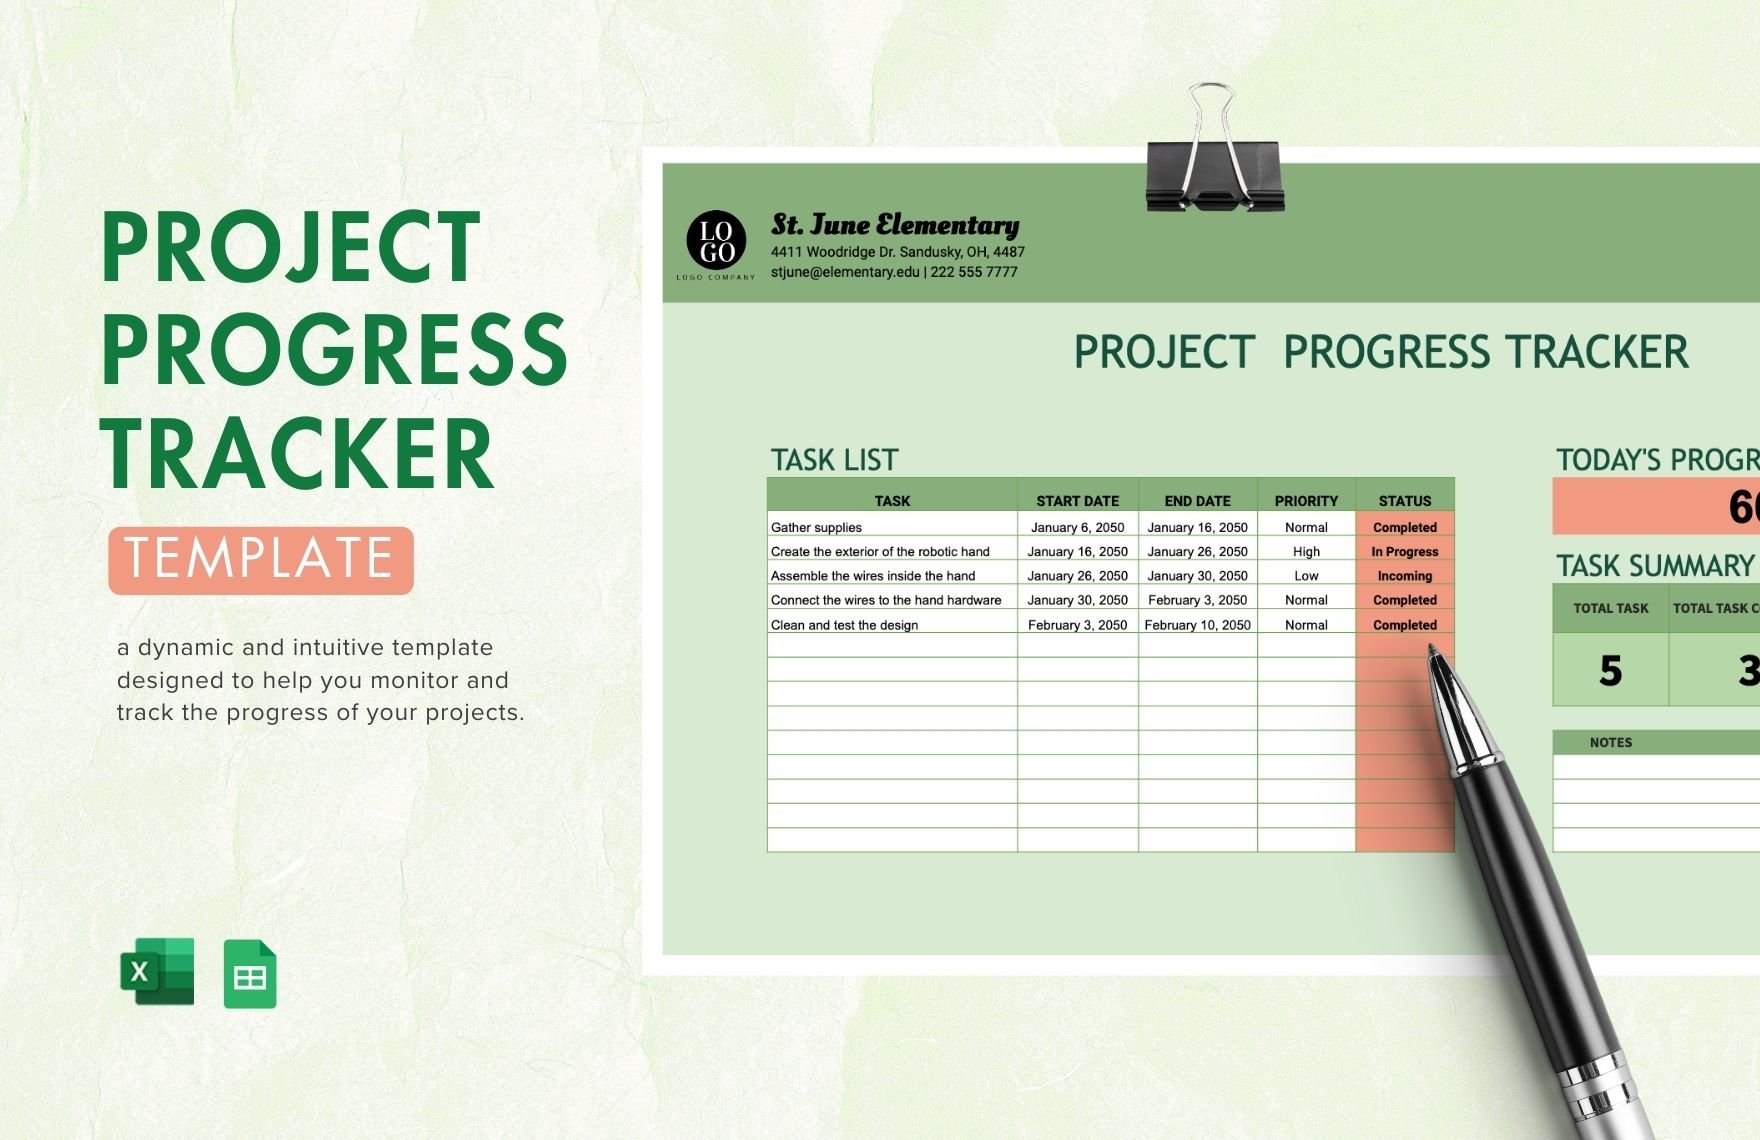 Project Progress Tracker Templates in Excel, Google Sheets